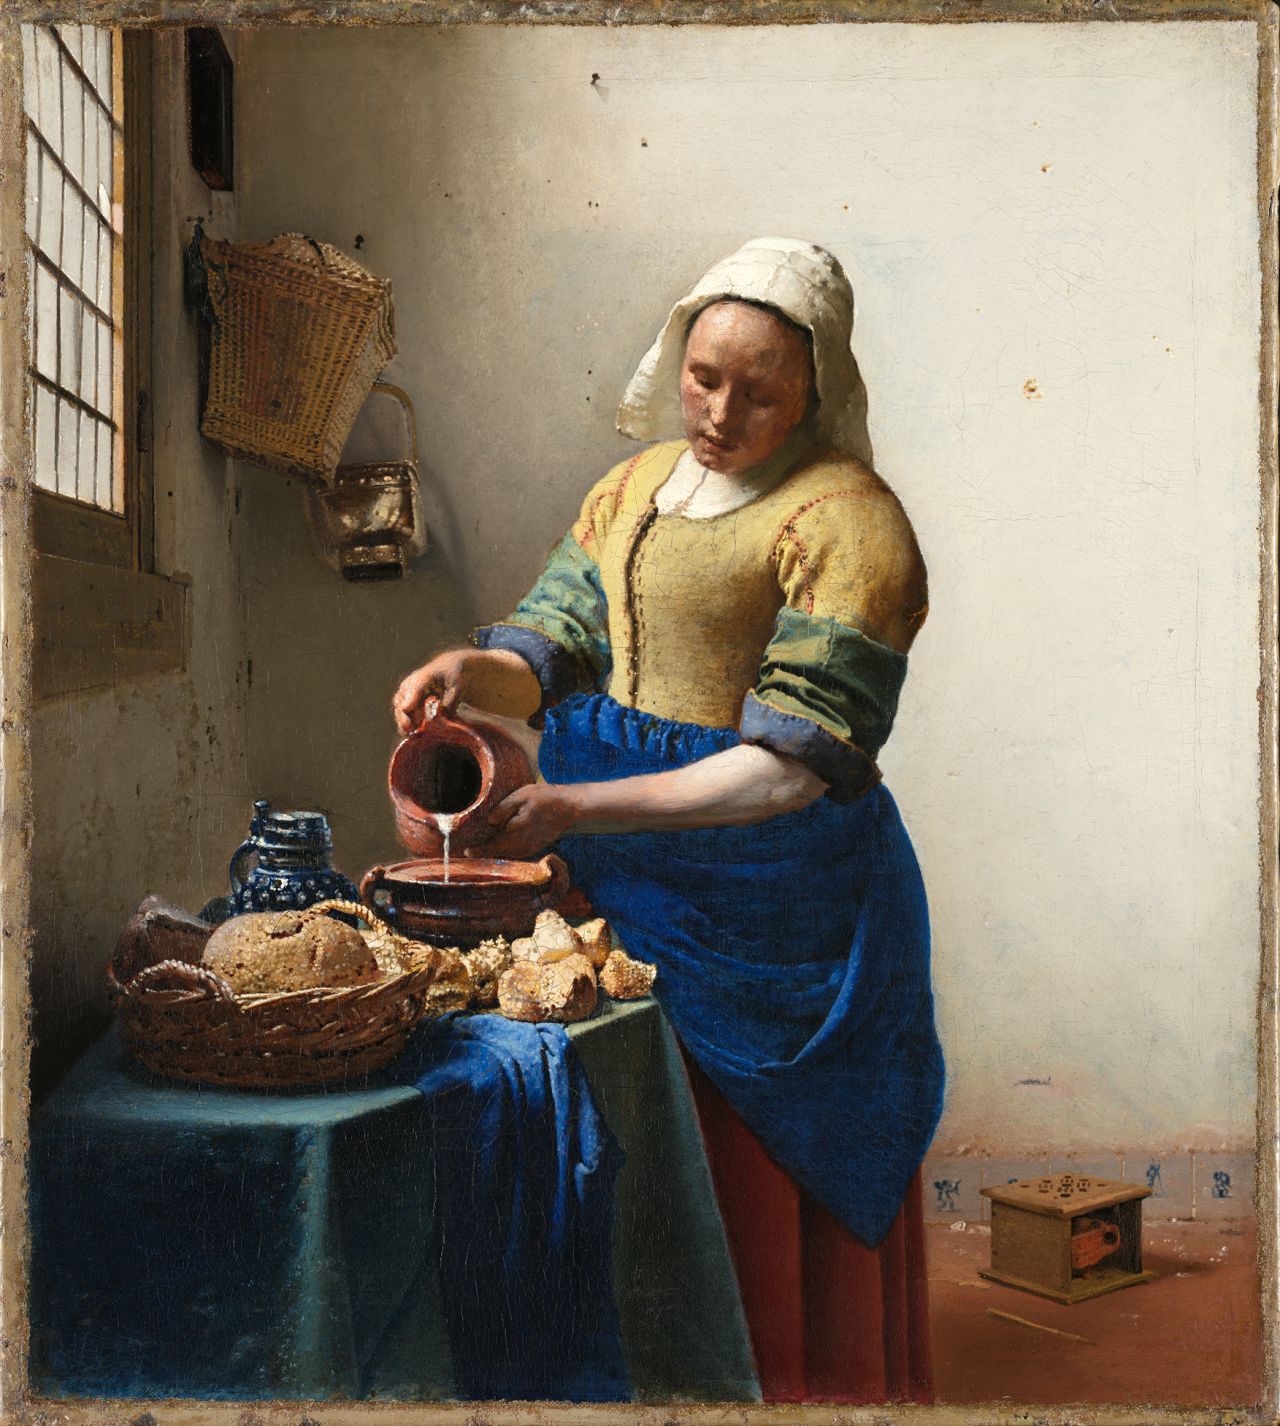 The Rijksmuseum is also home to several works by Johannes Vermeer -- "The Milkmaid" (1658-1660) is among those taking pride of place in the church-like Gallery of Honor.